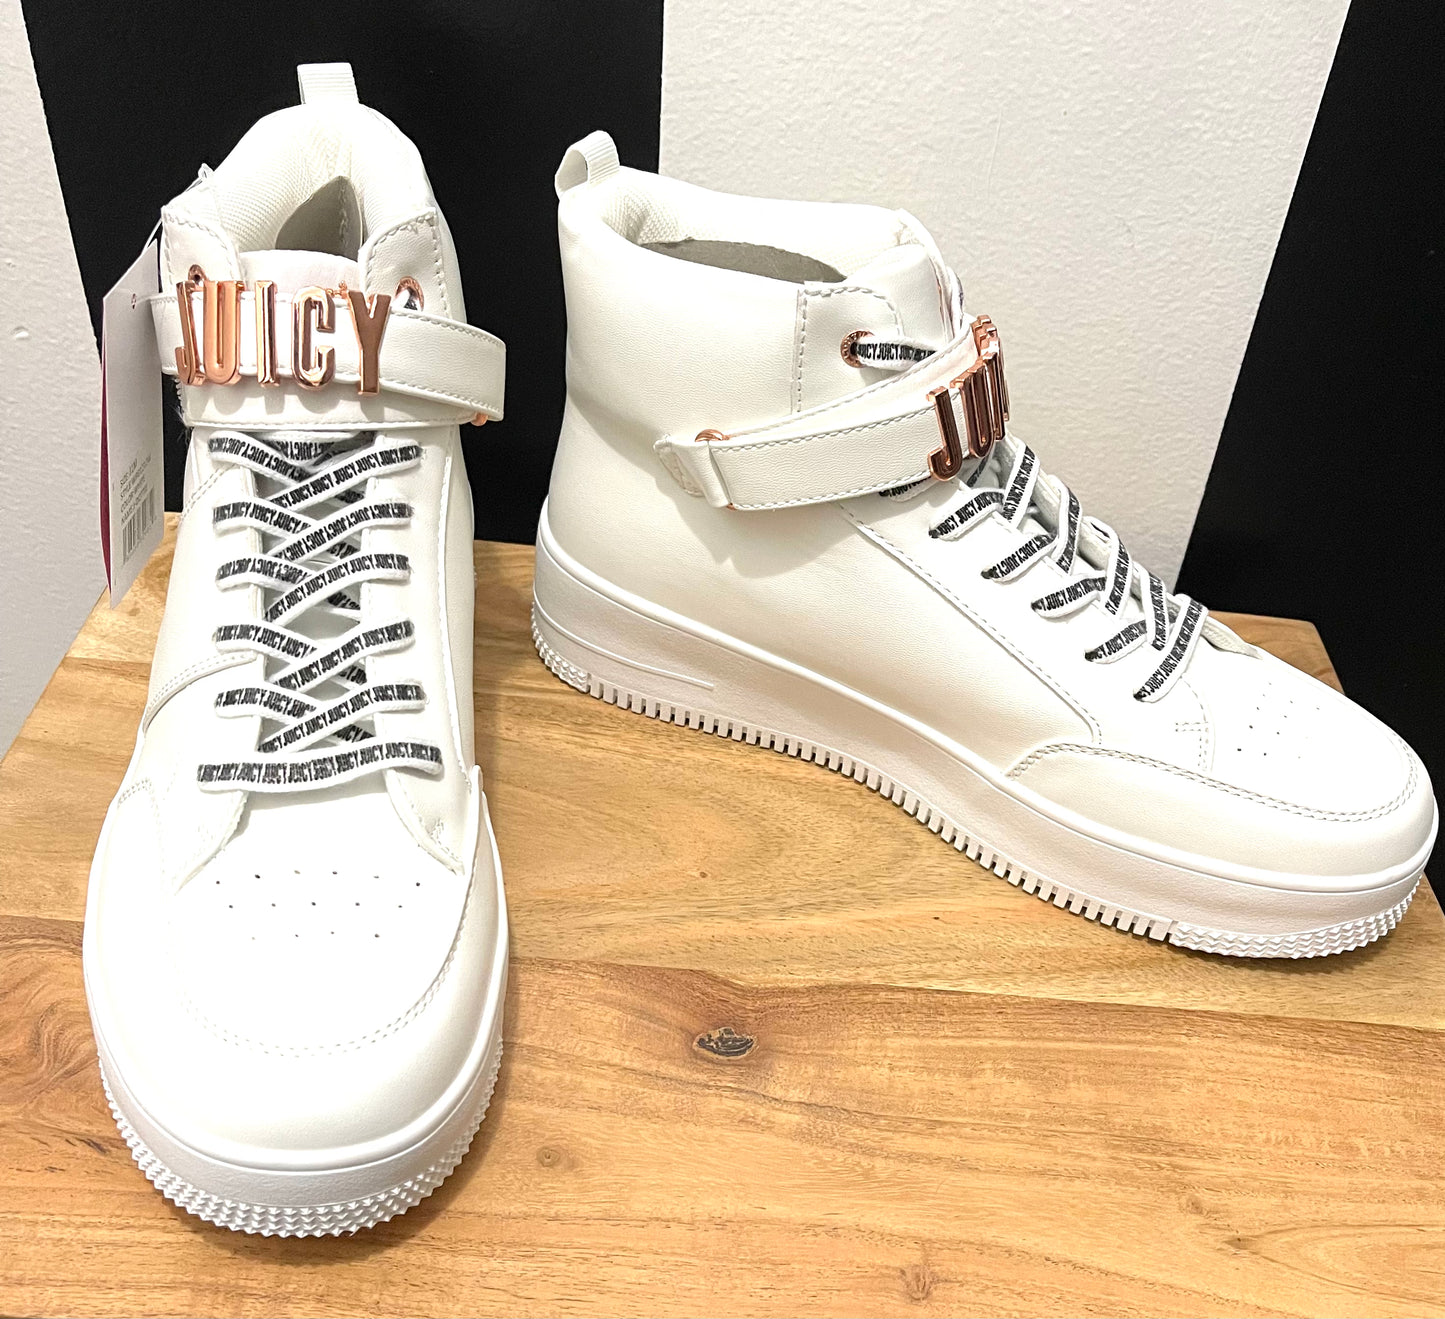 Juicy Couture High Tops- 9.5